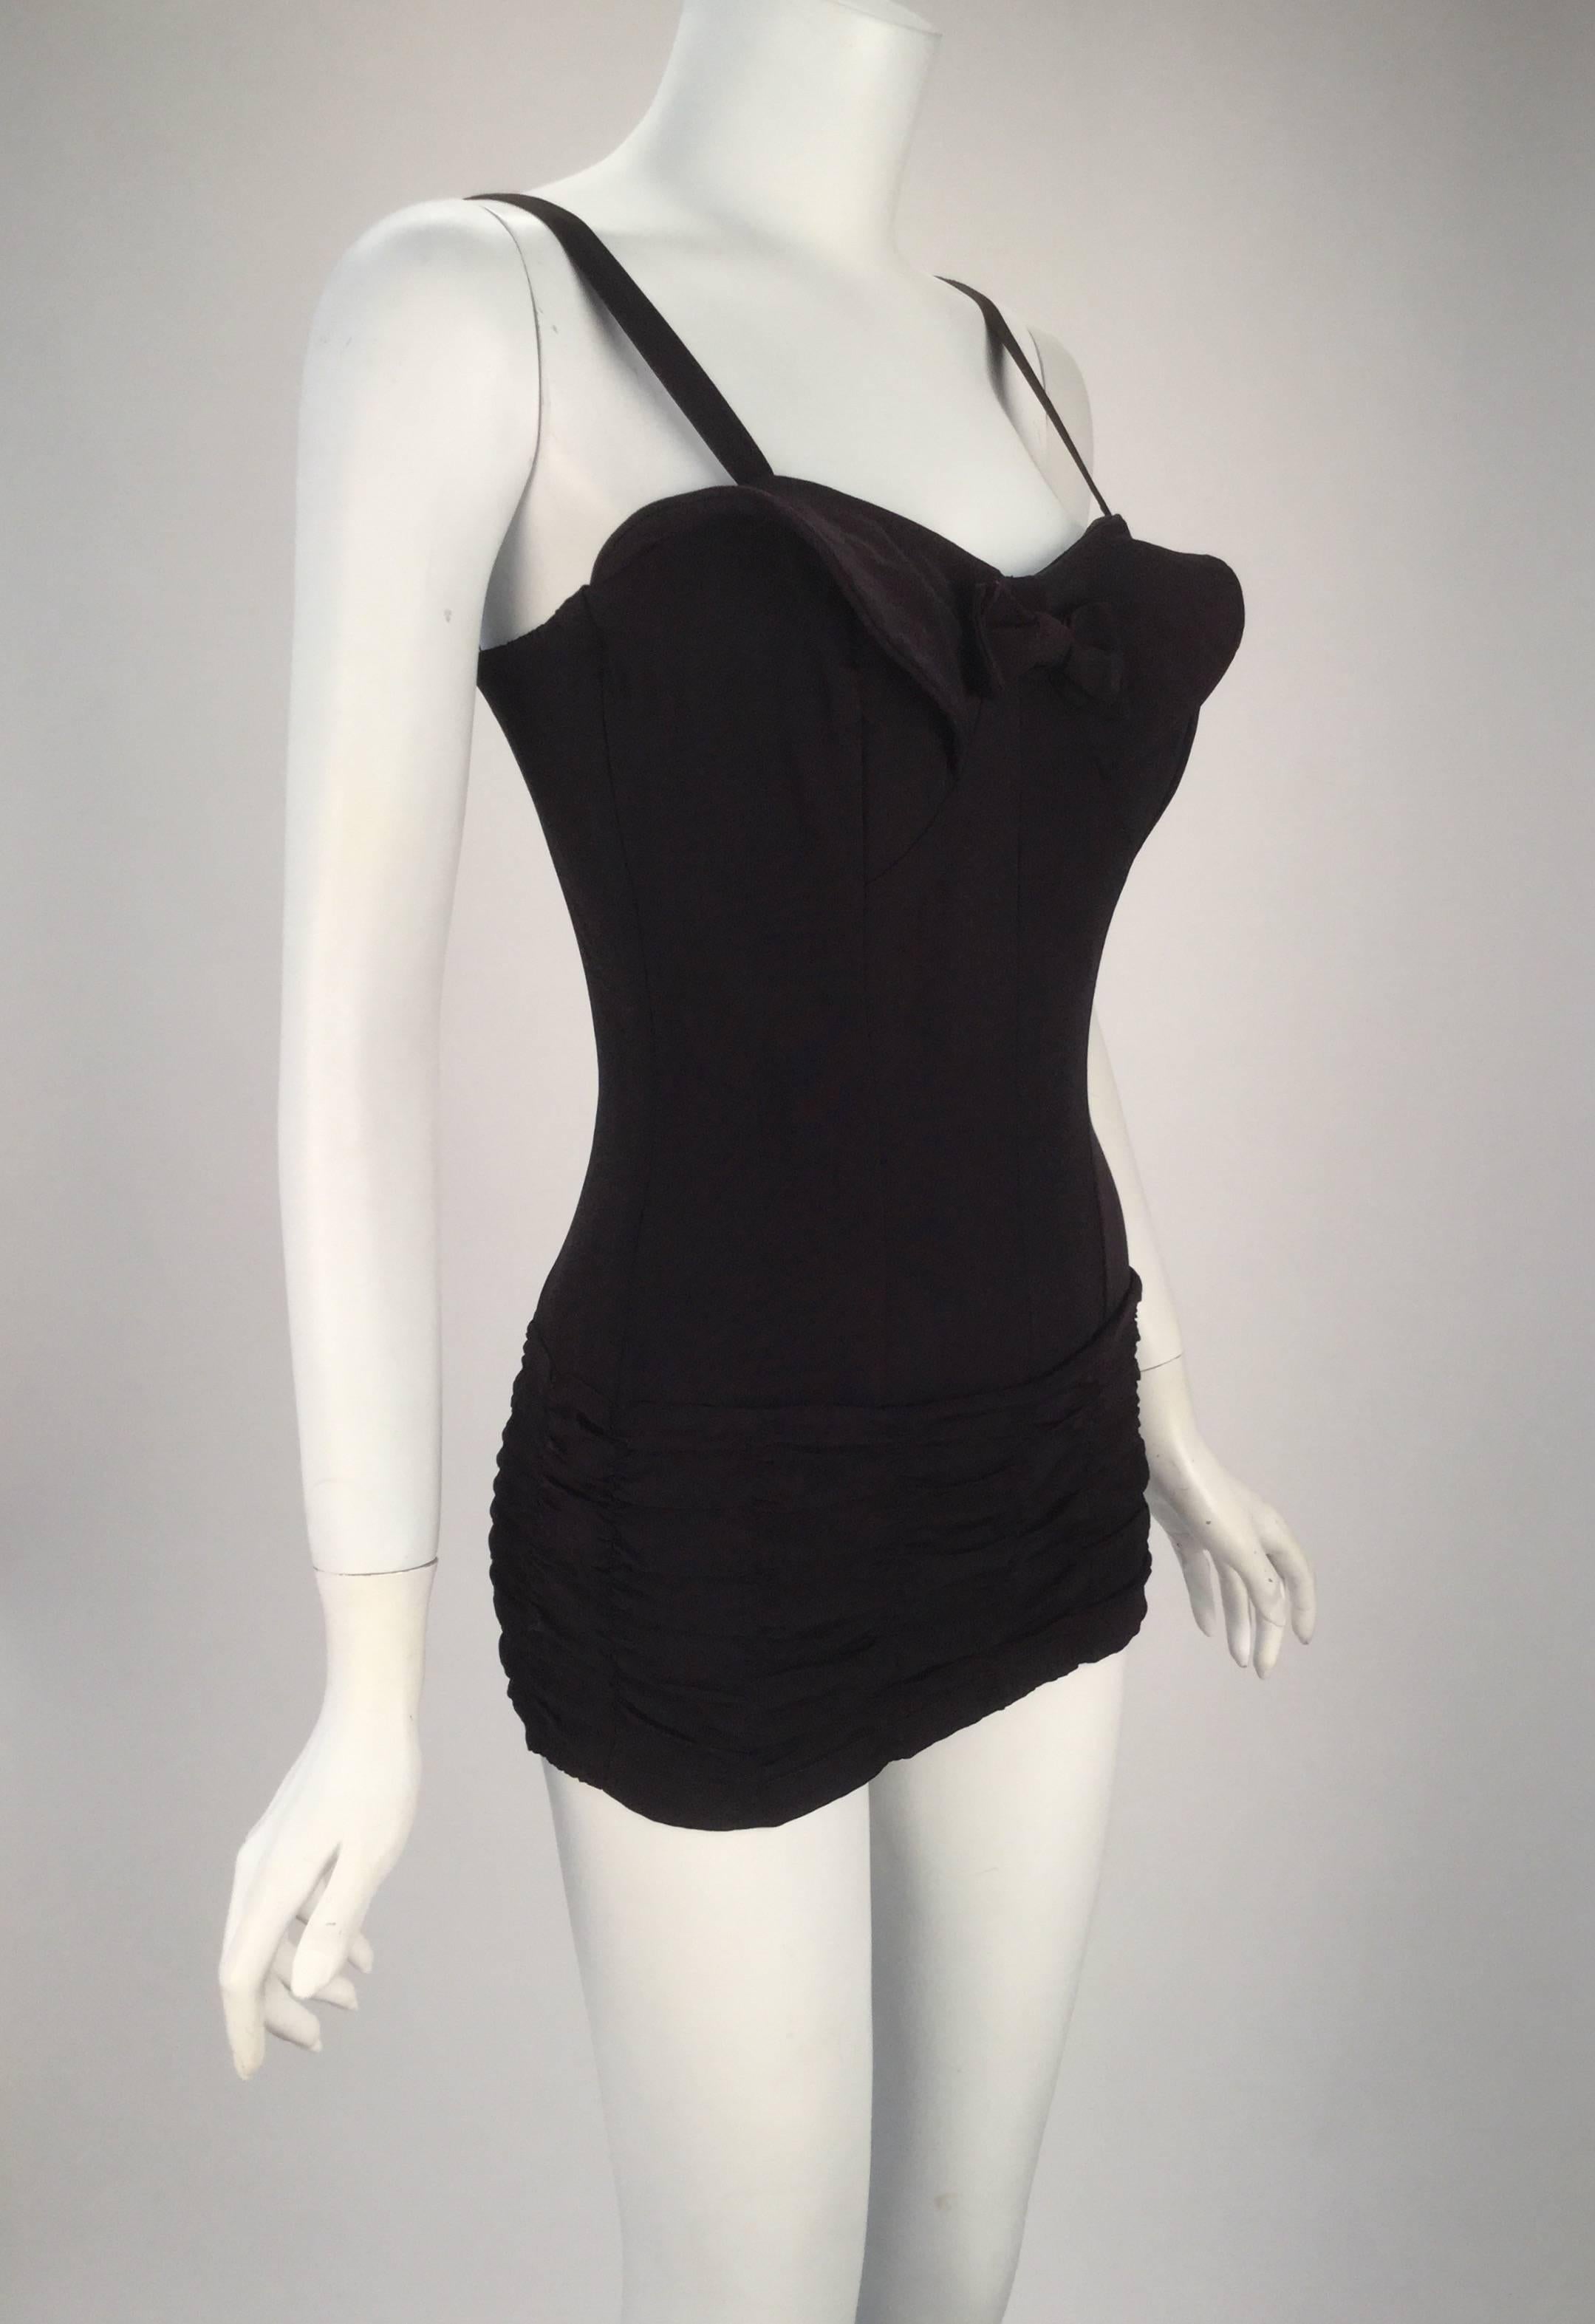 

1950s Maurice Handler Black one piece bathing suit. Like most bathing suits of the 50s, this one features an hourglass silhouette, complete with boning along almost every seam. The straps are detachable from the back. There is ruching detail at